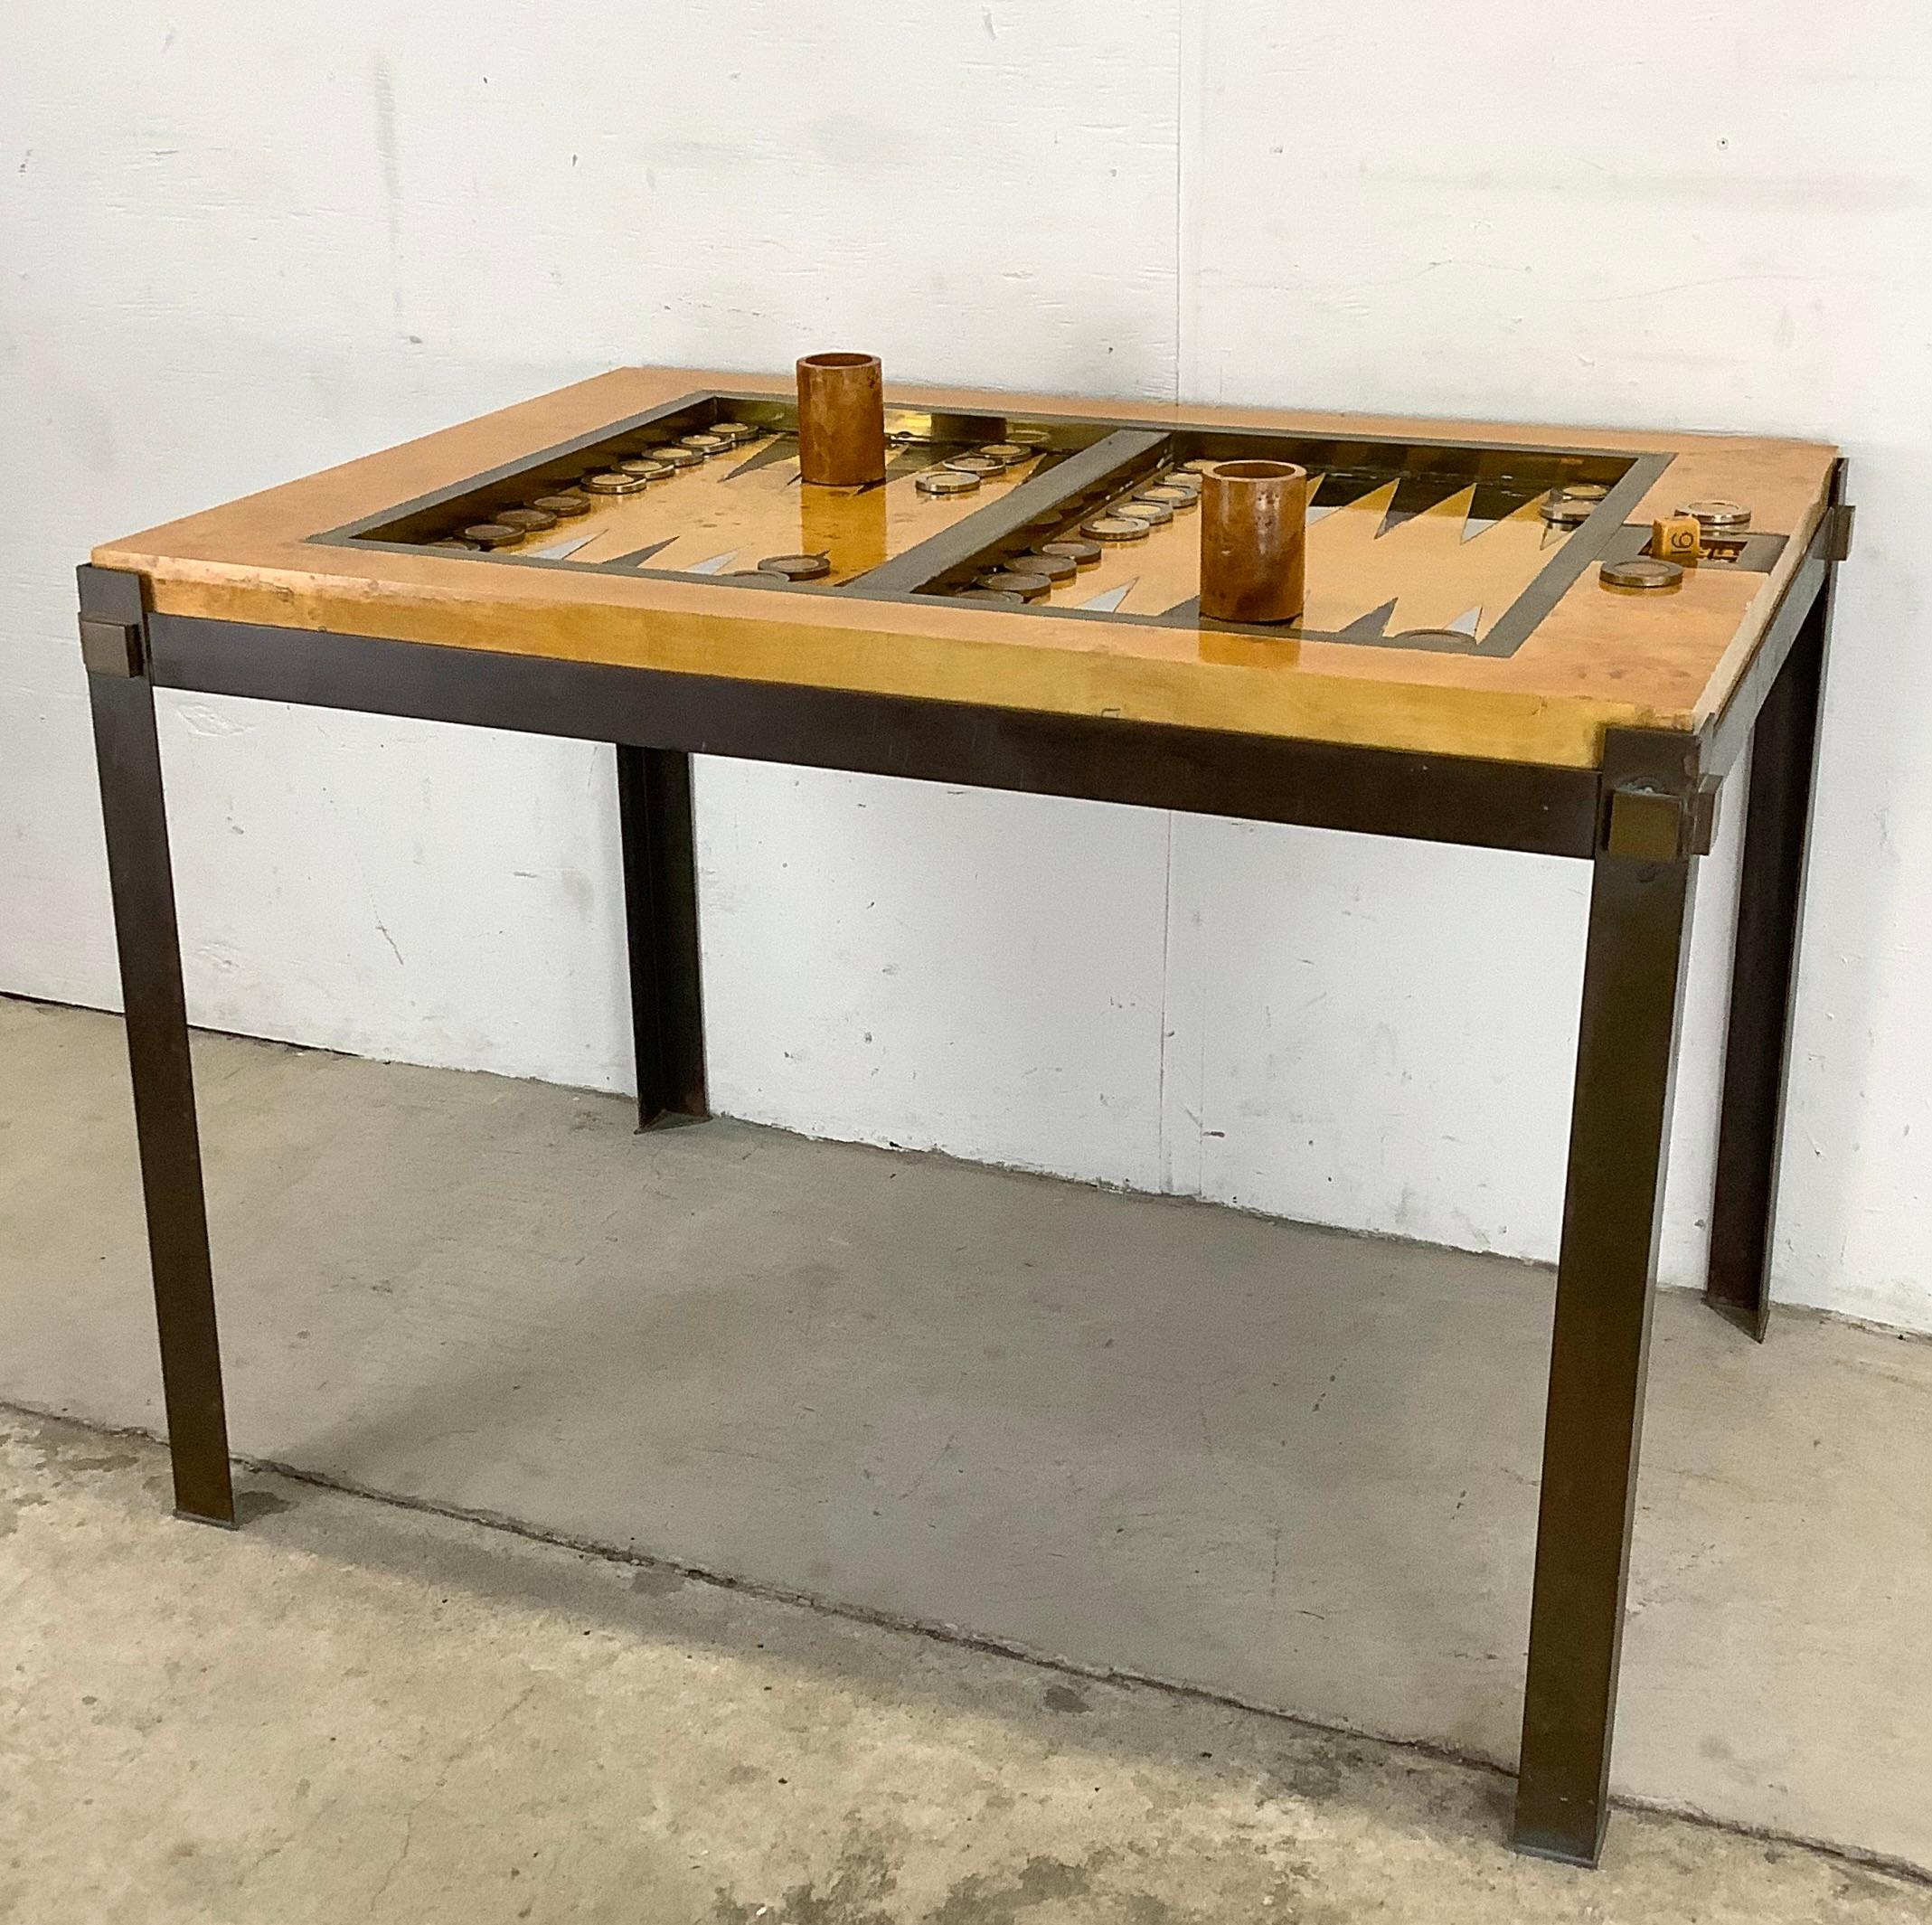 Elevate your living space with the Tommaso Barbi Brass and Burl Wood Backgammon Game Table with clear lucite table top. This exquisite Italian design from the 1960s combines functionality and artistic craftsmanship, making it a true statement piece